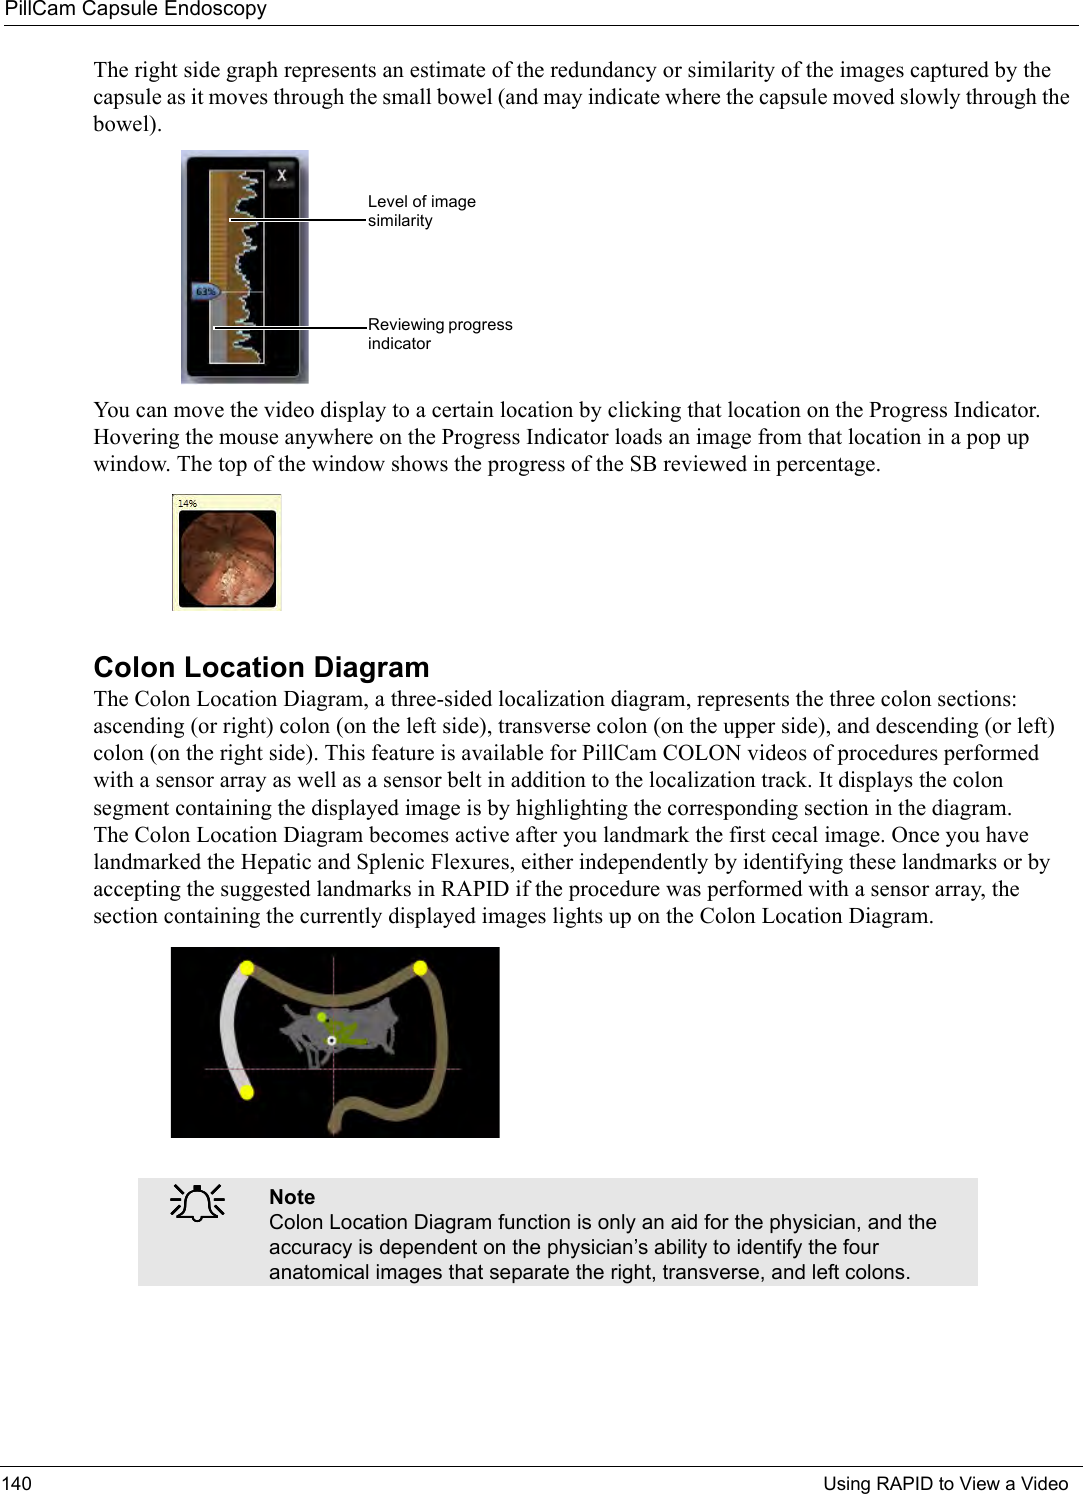 PillCam Capsule Endoscopy140 Using RAPID to View a VideoThe right side graph represents an estimate of the redundancy or similarity of the images captured by the capsule as it moves through the small bowel (and may indicate where the capsule moved slowly through the bowel). You can move the video display to a certain location by clicking that location on the Progress Indicator. Hovering the mouse anywhere on the Progress Indicator loads an image from that location in a pop up window. The top of the window shows the progress of the SB reviewed in percentage. Colon Location DiagramThe Colon Location Diagram, a three-sided localization diagram, represents the three colon sections: ascending (or right) colon (on the left side), transverse colon (on the upper side), and descending (or left) colon (on the right side). This feature is available for PillCam COLON videos of procedures performed with a sensor array as well as a sensor belt in addition to the localization track. It displays the colon segment containing the displayed image is by highlighting the corresponding section in the diagram. The Colon Location Diagram becomes active after you landmark the first cecal image. Once you have landmarked the Hepatic and Splenic Flexures, either independently by identifying these landmarks or by accepting the suggested landmarks in RAPID if the procedure was performed with a sensor array, the section containing the currently displayed images lights up on the Colon Location Diagram.֠֠֠֠NoteColon Location Diagram function is only an aid for the physician, and the accuracy is dependent on the physician’s ability to identify the four anatomical images that separate the right, transverse, and left colons.Level of image similarityReviewing progress indicator